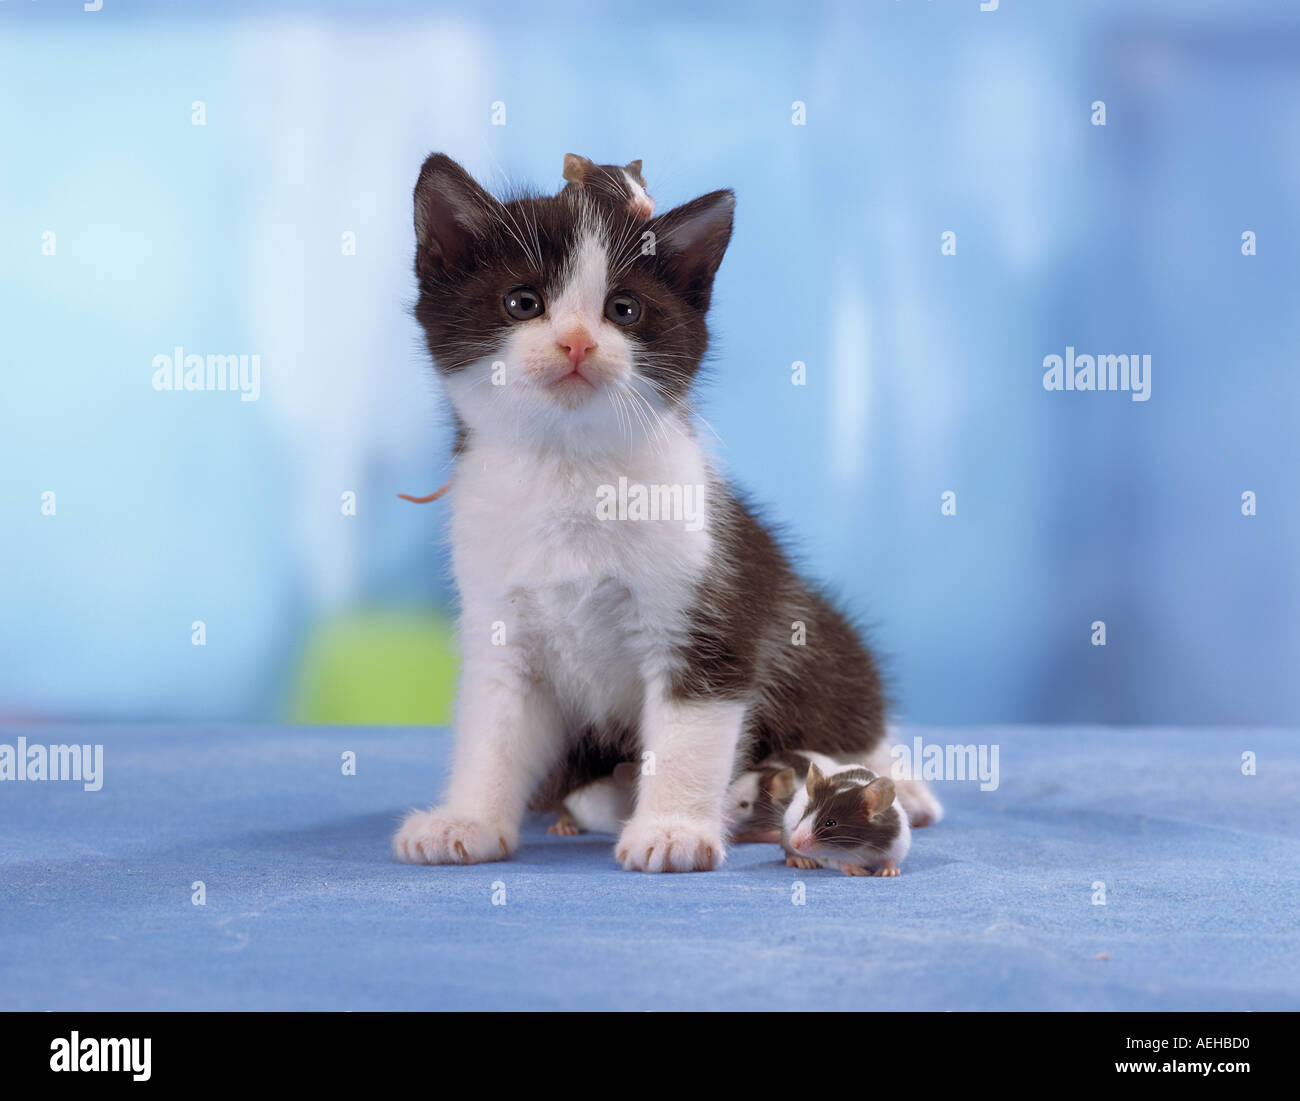 Domestic Cat And Mouse Kitten With Mouse On Its Head Friends Stock Photo Alamy